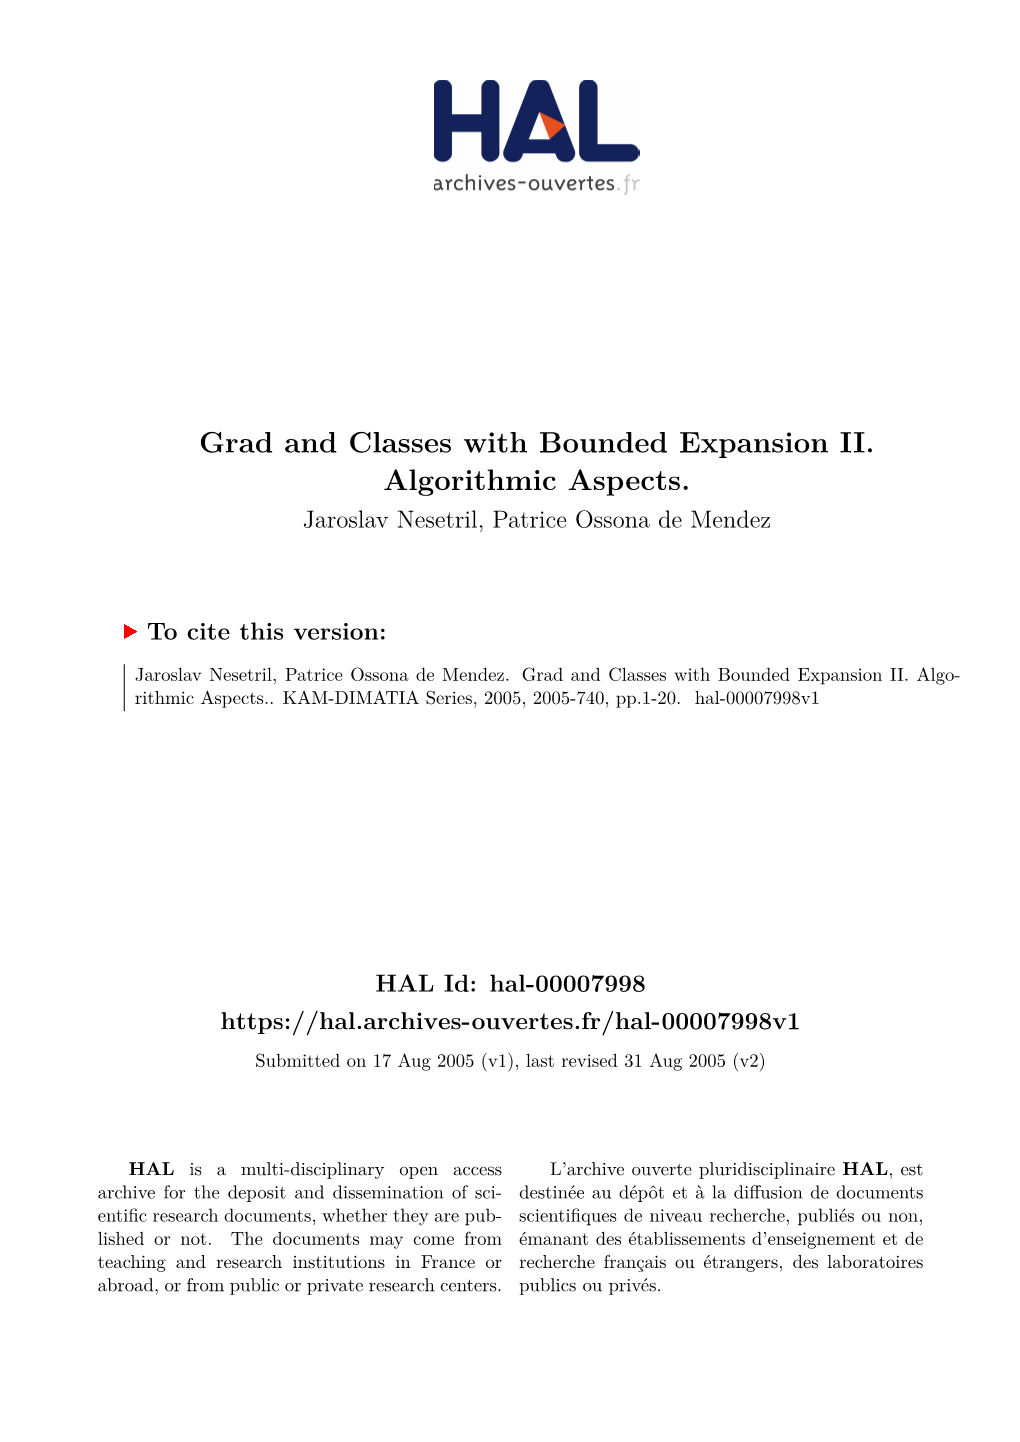 Grad and Classes with Bounded Expansion II. Algorithmic Aspects. Jaroslav Nesetril, Patrice Ossona De Mendez